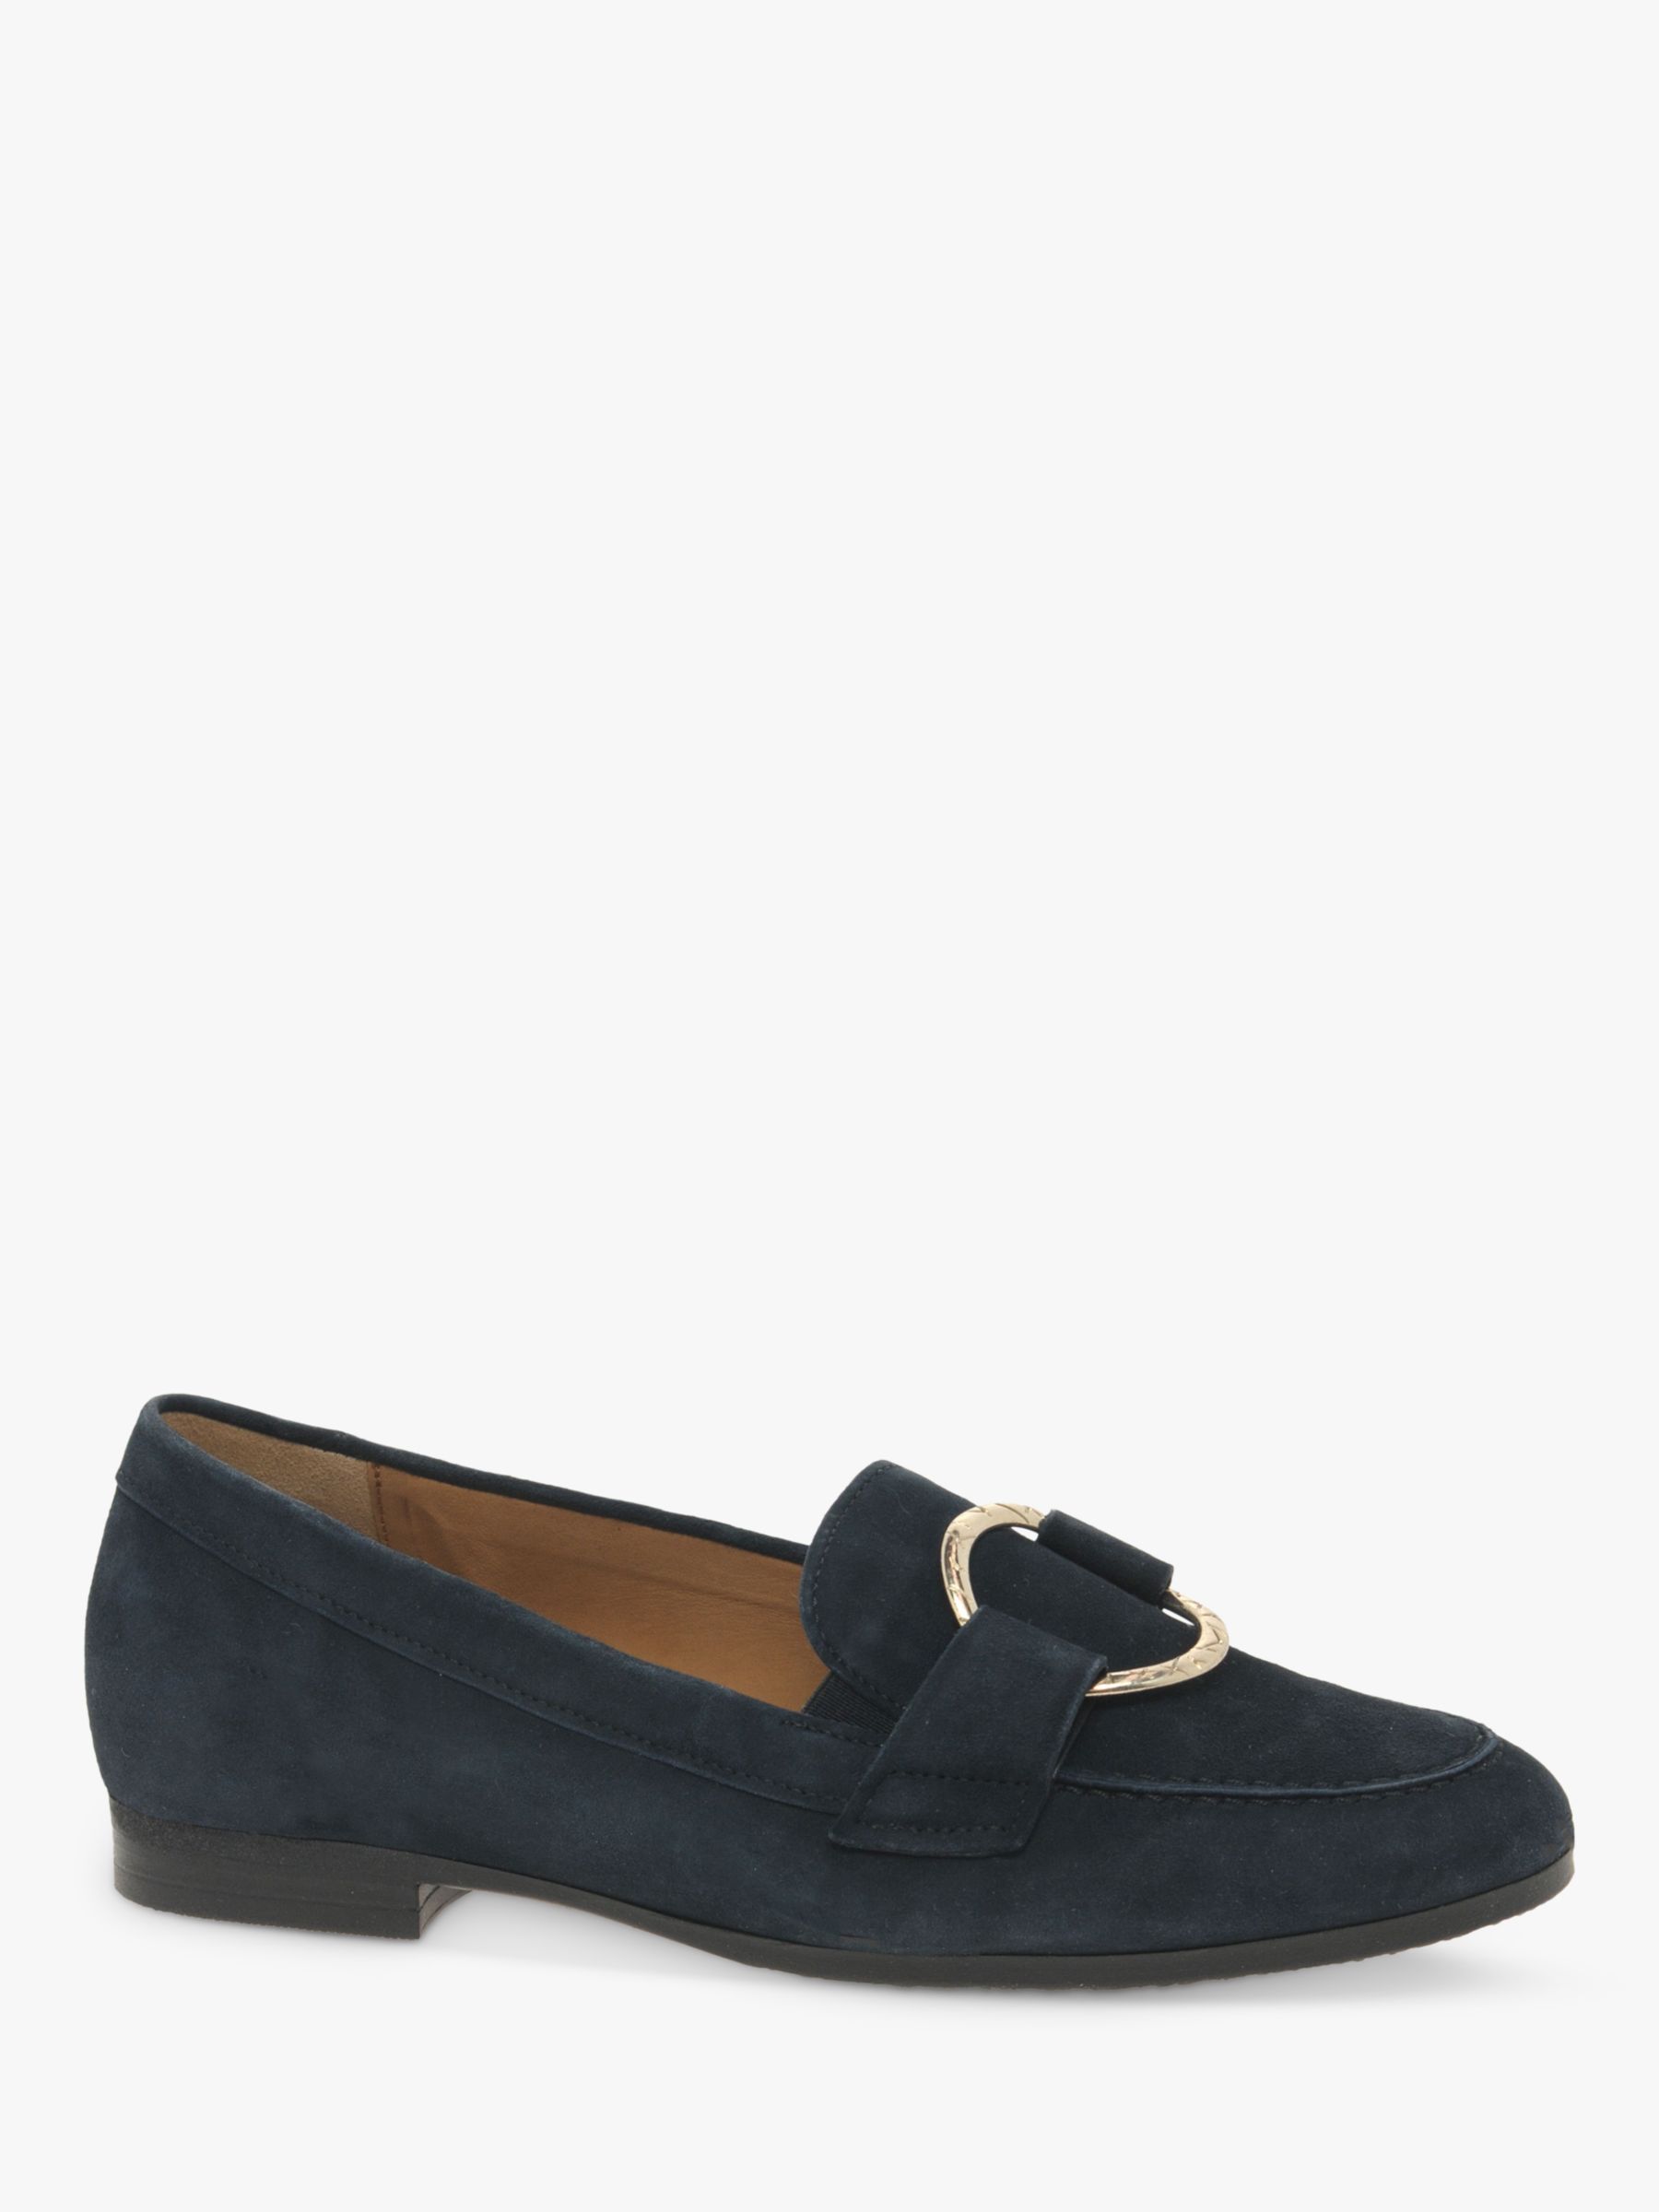 Gabor Cheers Wide Fit Suede Loafers, Navy at John Lewis & Partners